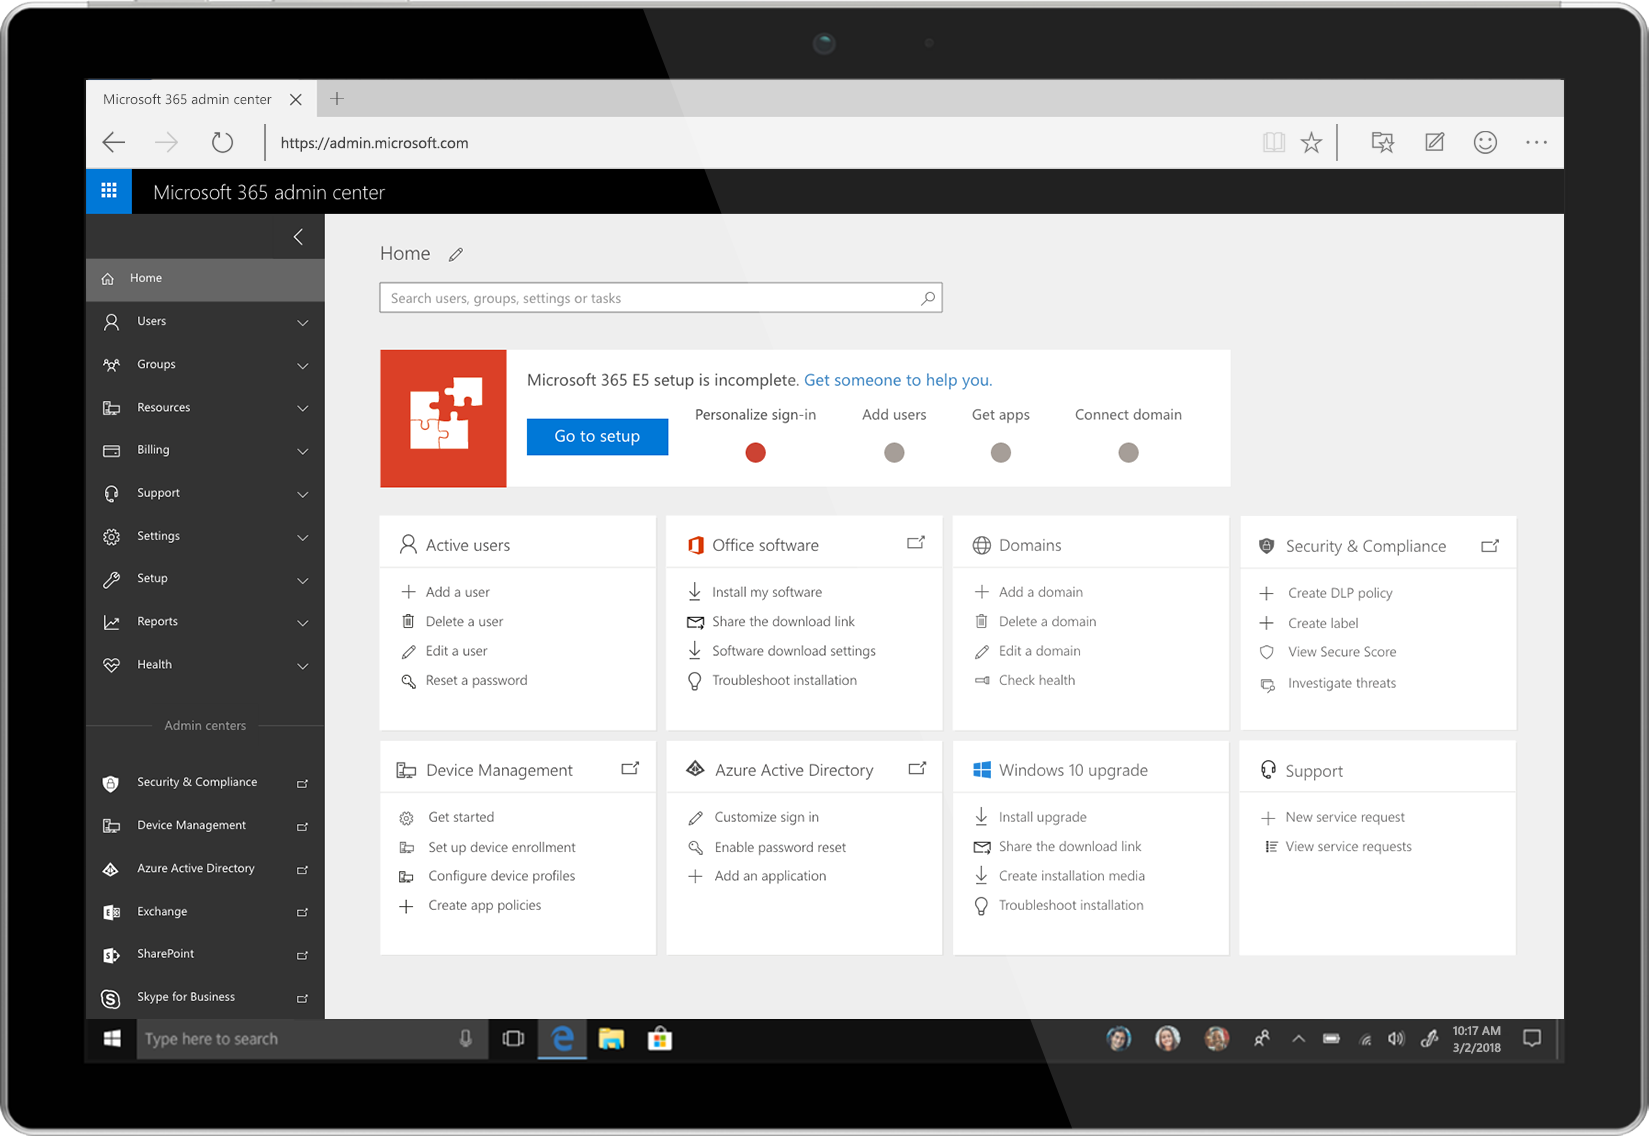 Image of a tablet showing the Microsoft 365 admin center.